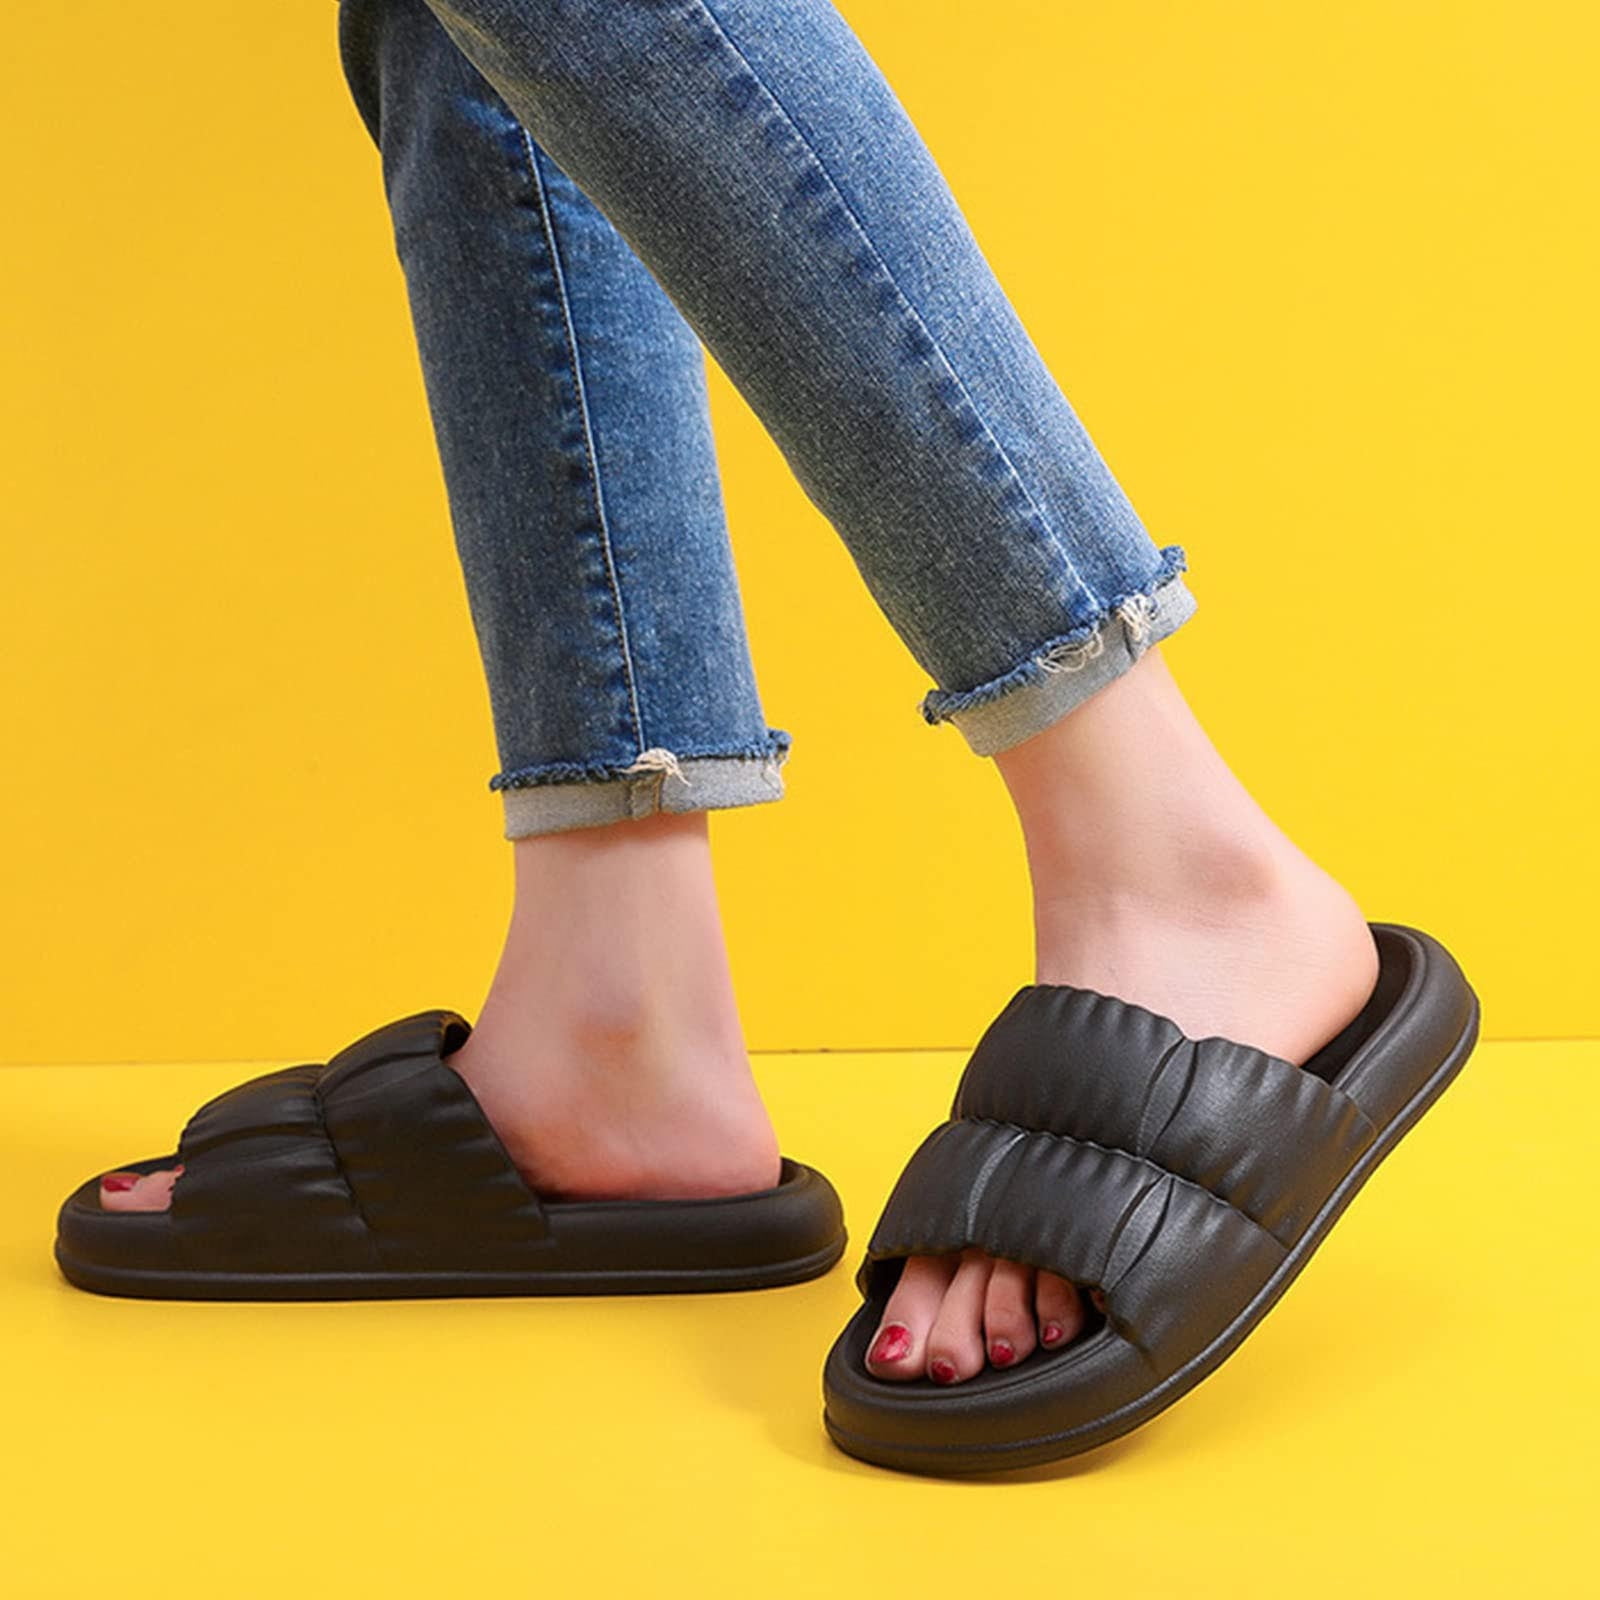 Buy 1 Pair Summer Sandals Low Top Round Toe Flat Bottom Non-Slip Widely  Used Daily Wear Footwear Summer Open Toe Beach Sandals Home Supplies-Light  Blue Online | Kogan.com. Description: Thanks to the